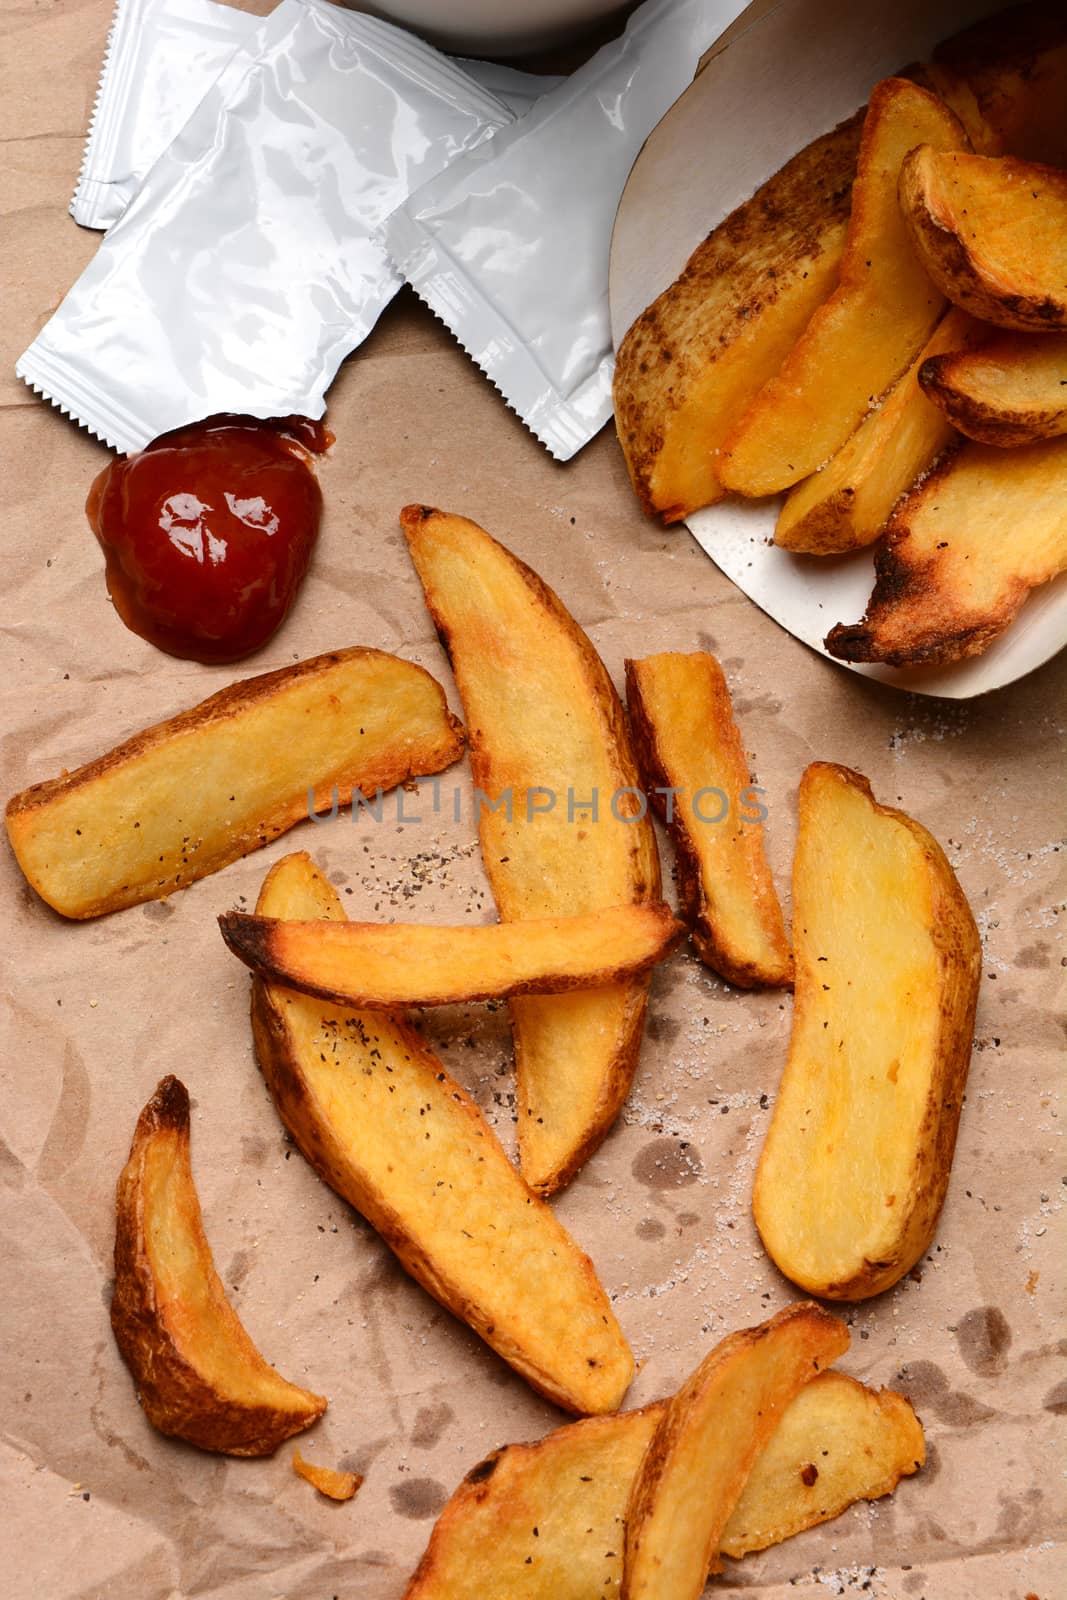 French Fries spilled onto a brown bag. Ketchup dollop and packets  with salt and pepper. Vertical format filling the frame.